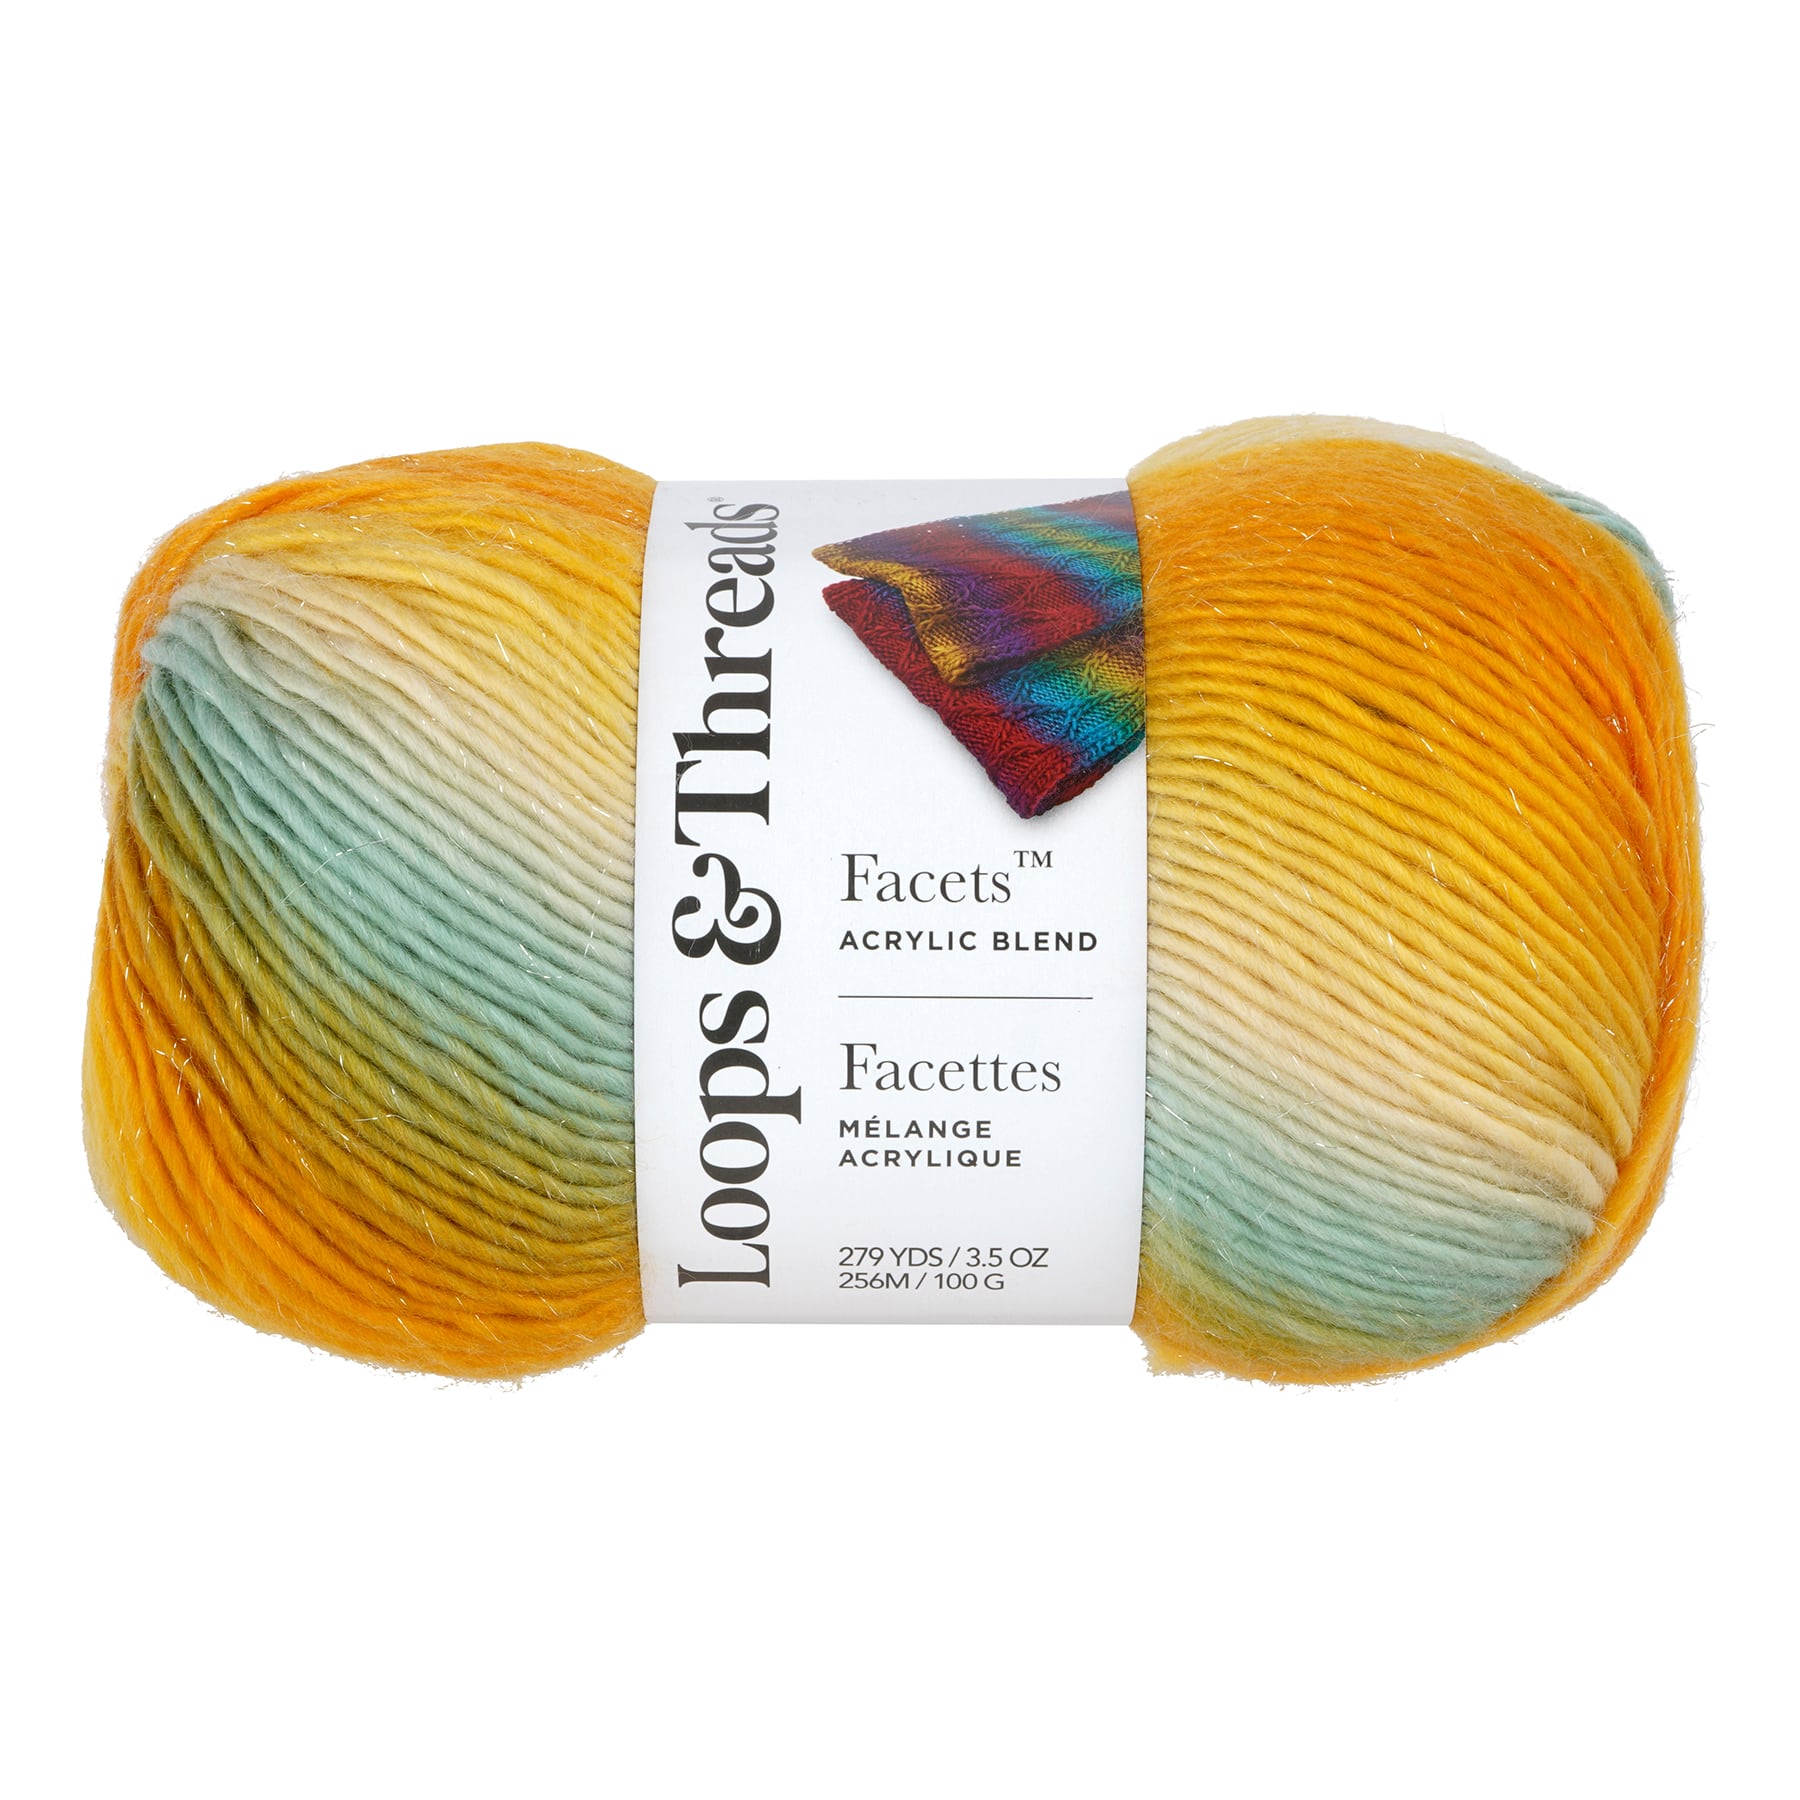 Crochets - tricot Magasin Michaels